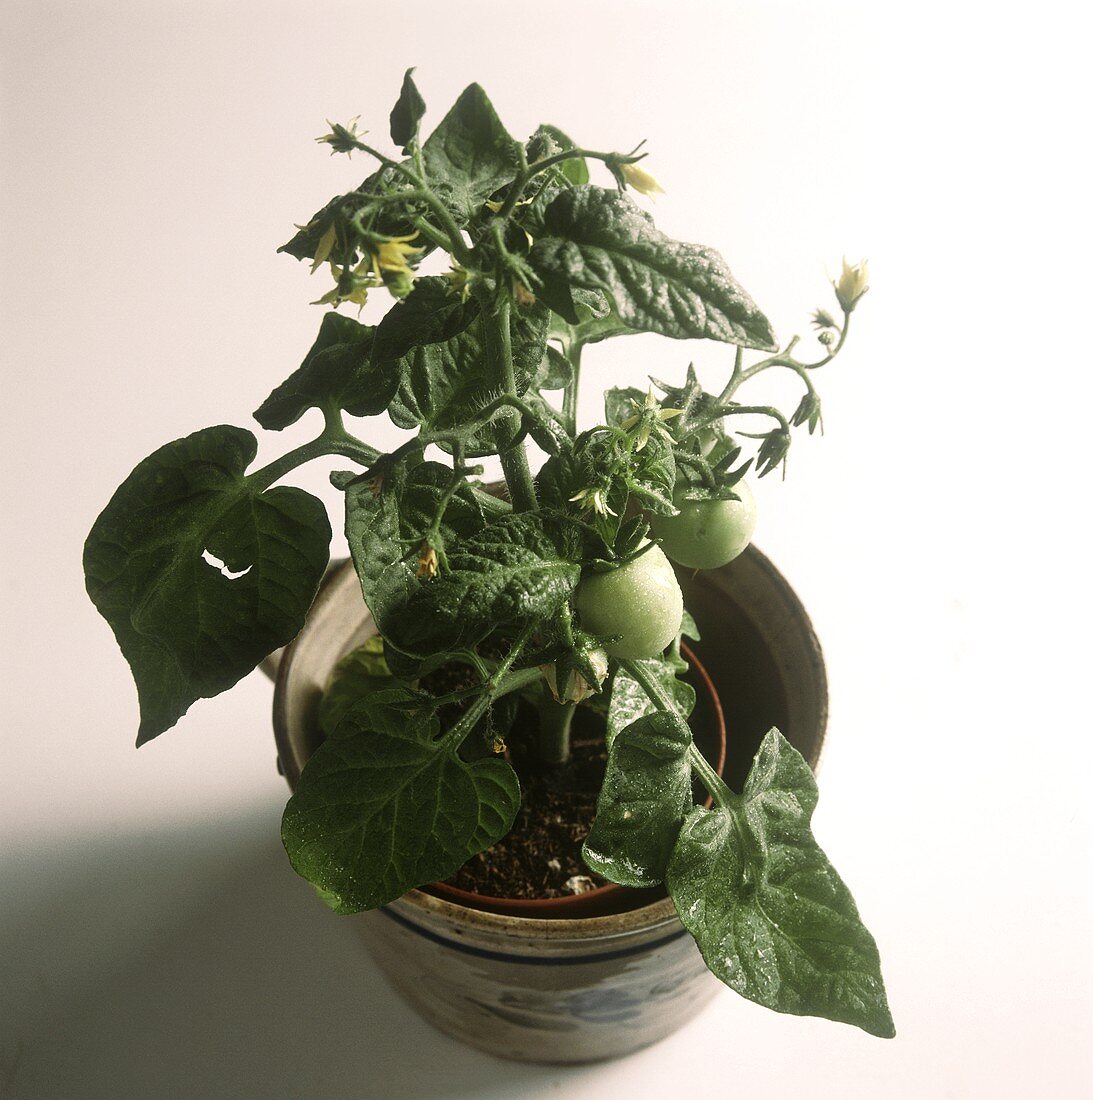 Tomato plants with flowers & green tomatoes in a pot